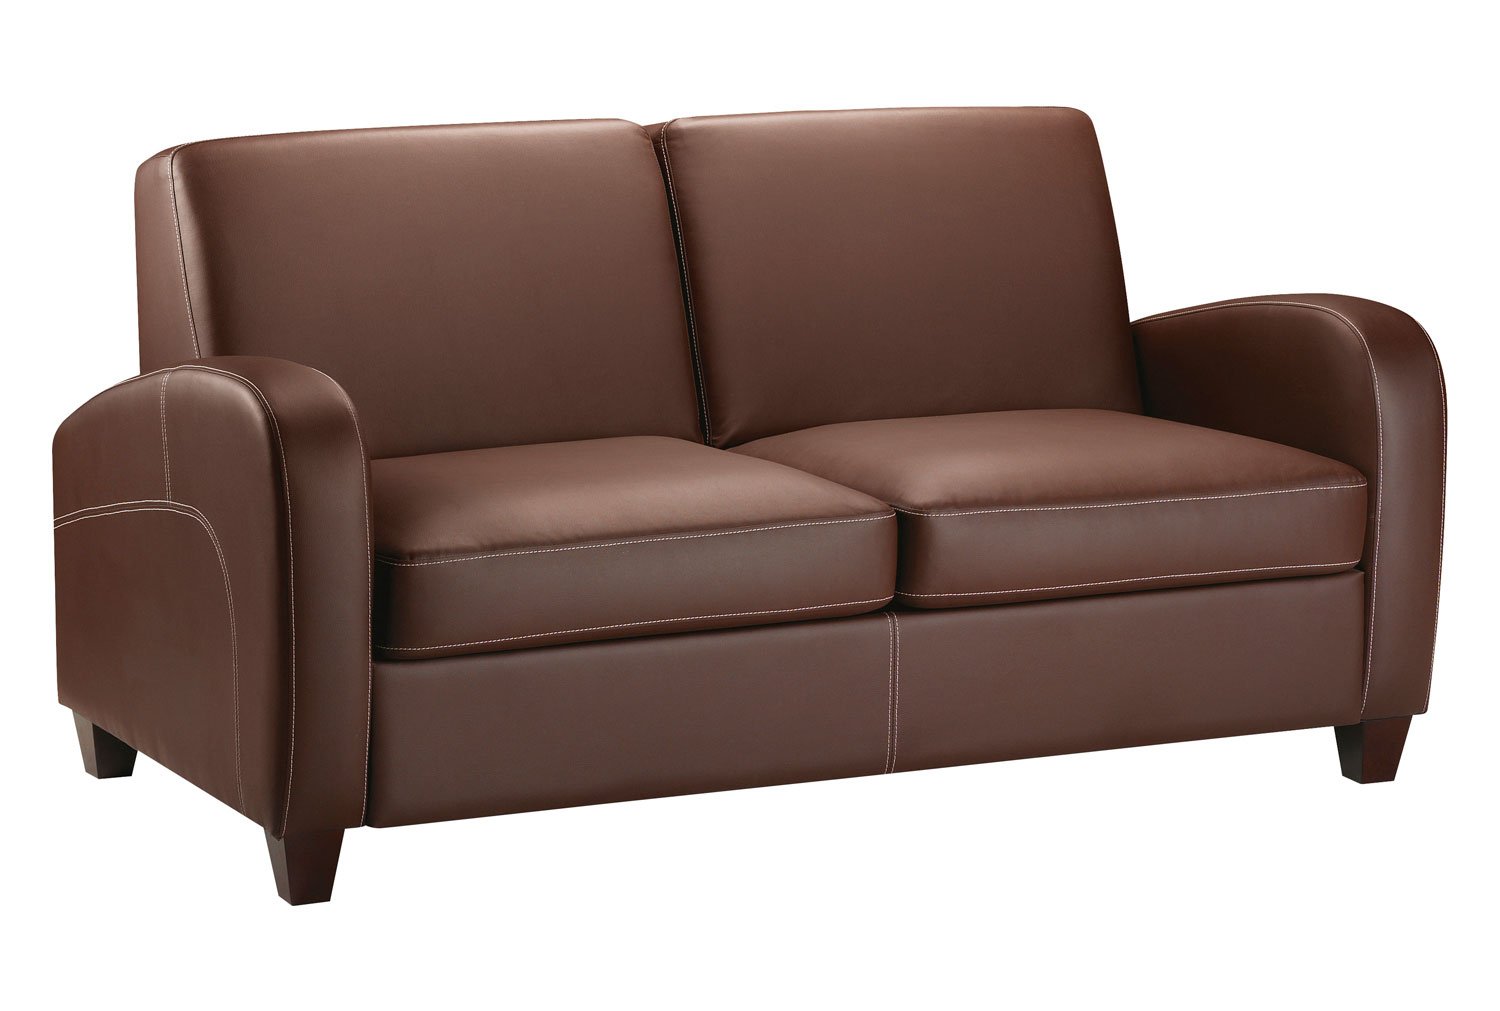 Donovan Faux Leather Sofa Bed